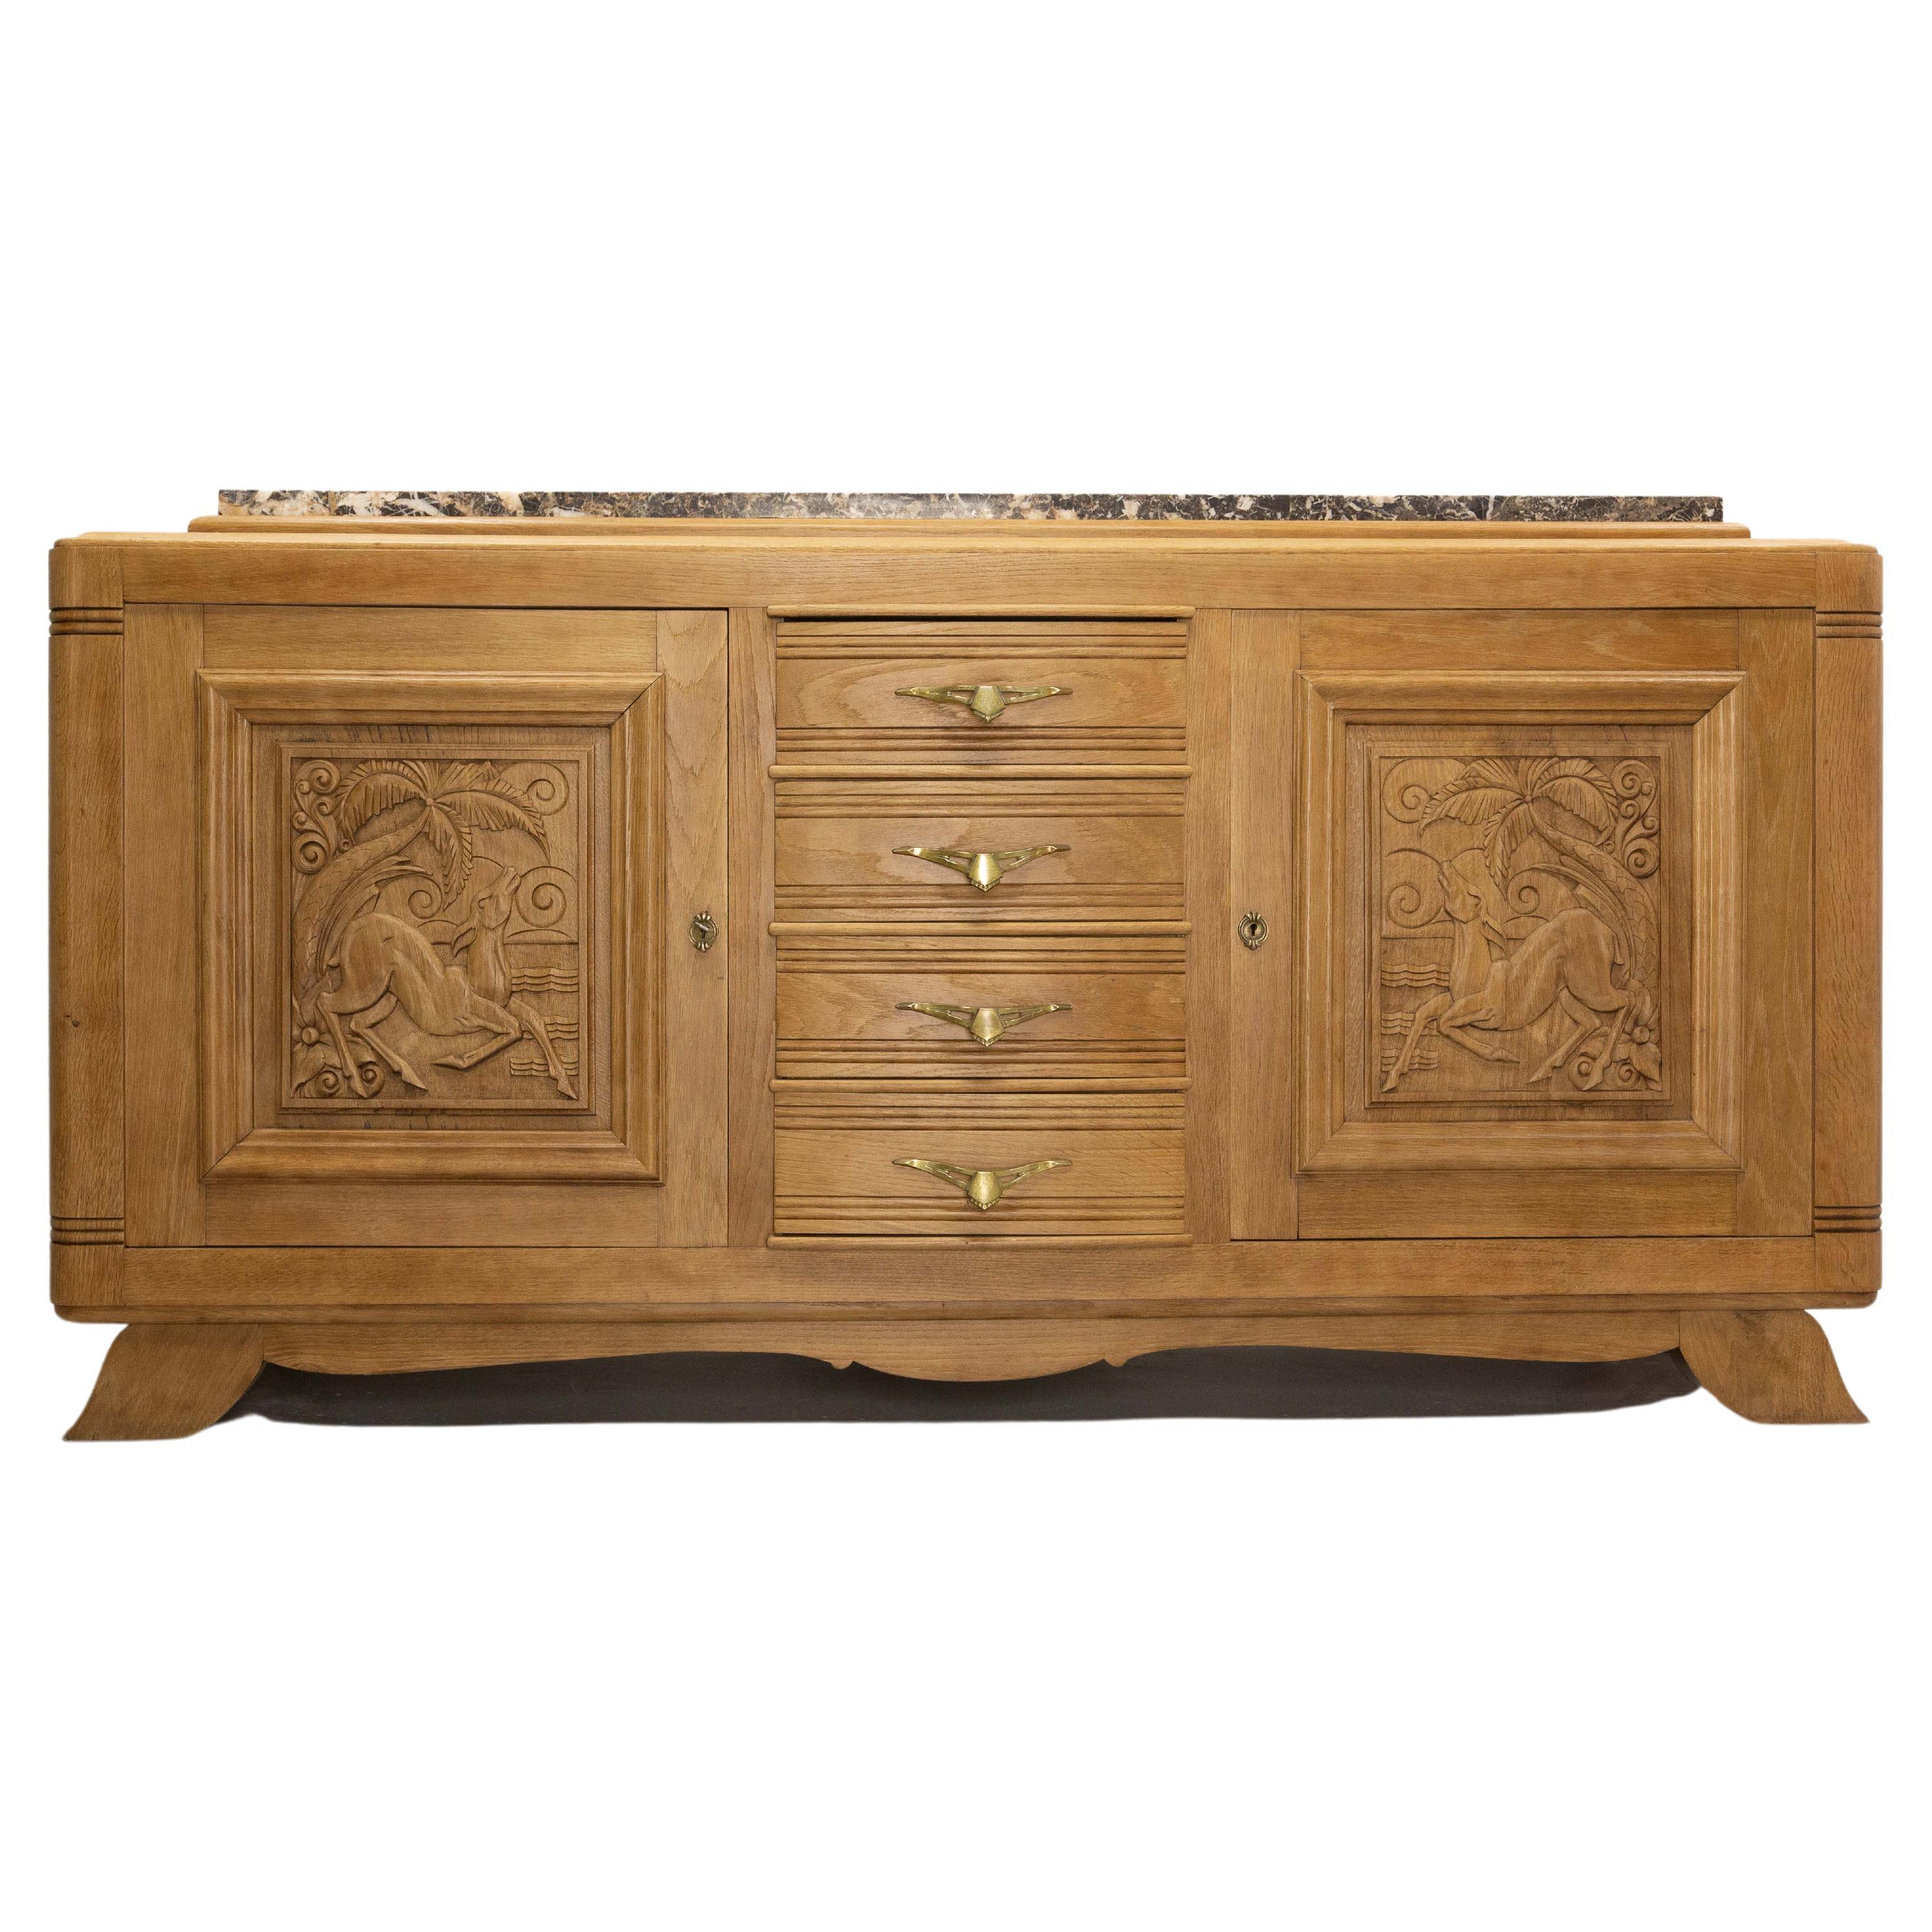 Mid-century sideboard French credenza buffet, circa 1940.
Four drawers and two cabinets with a carved antelope in and exotic decor on each door.
Marble top, and solid oak, 
Very good condition, this cabinet has been completely stripped and the